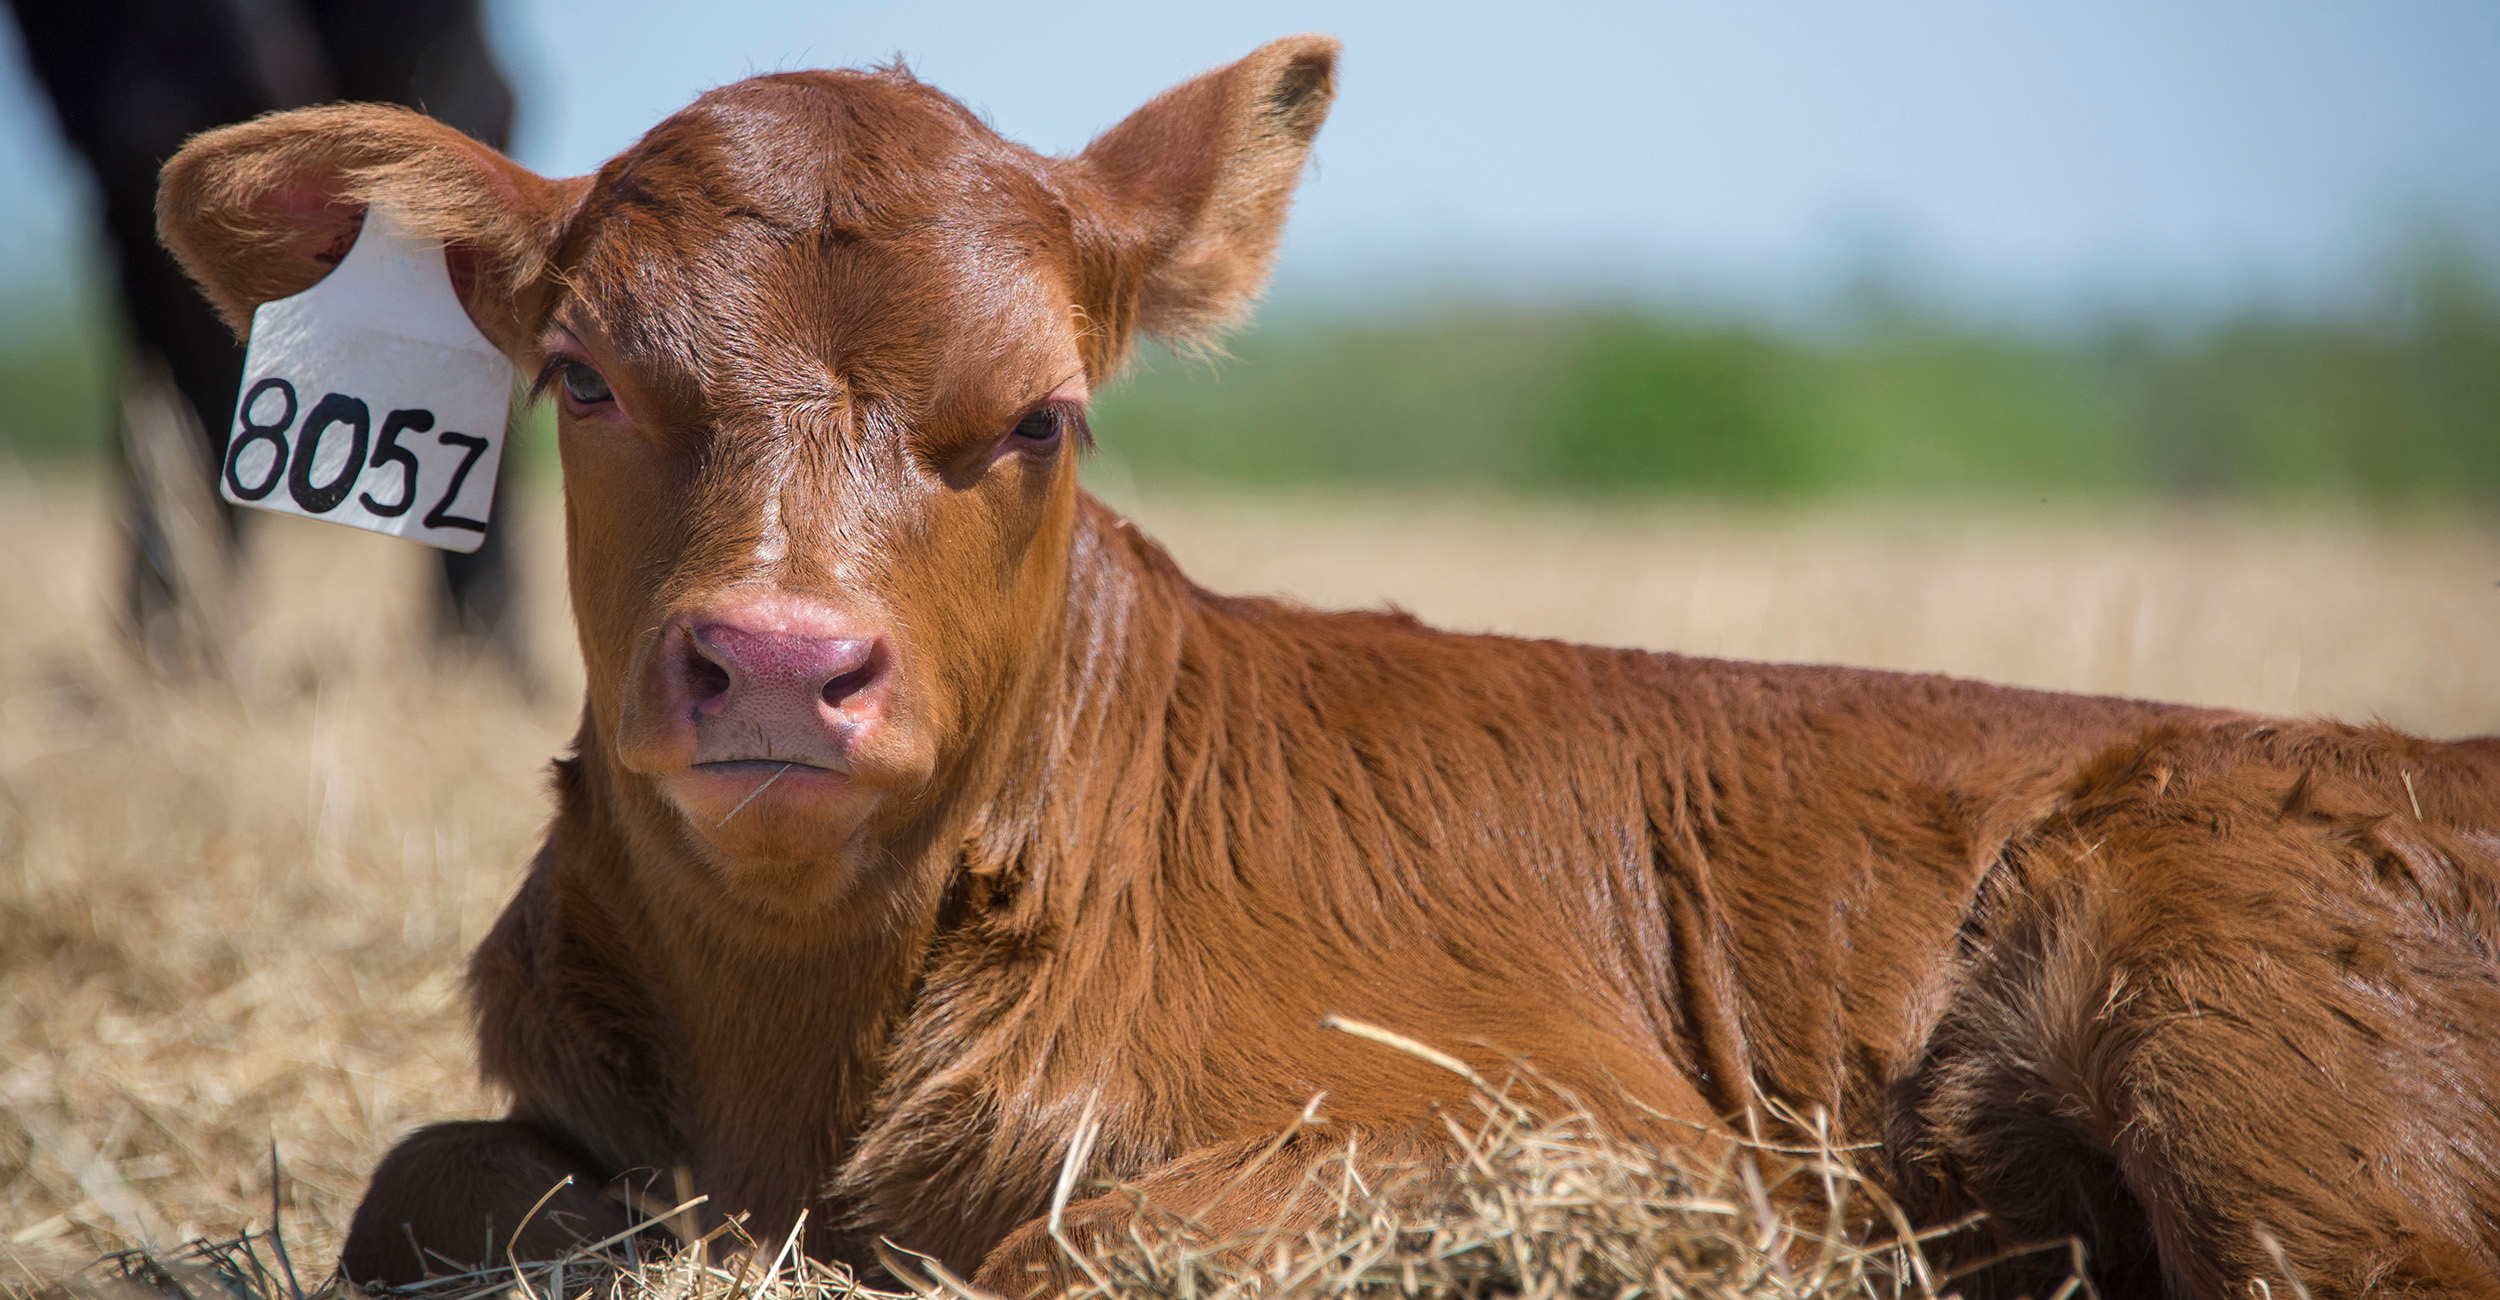 Veterinary Viewpoints: Importance of Hydration When Scouring Calves